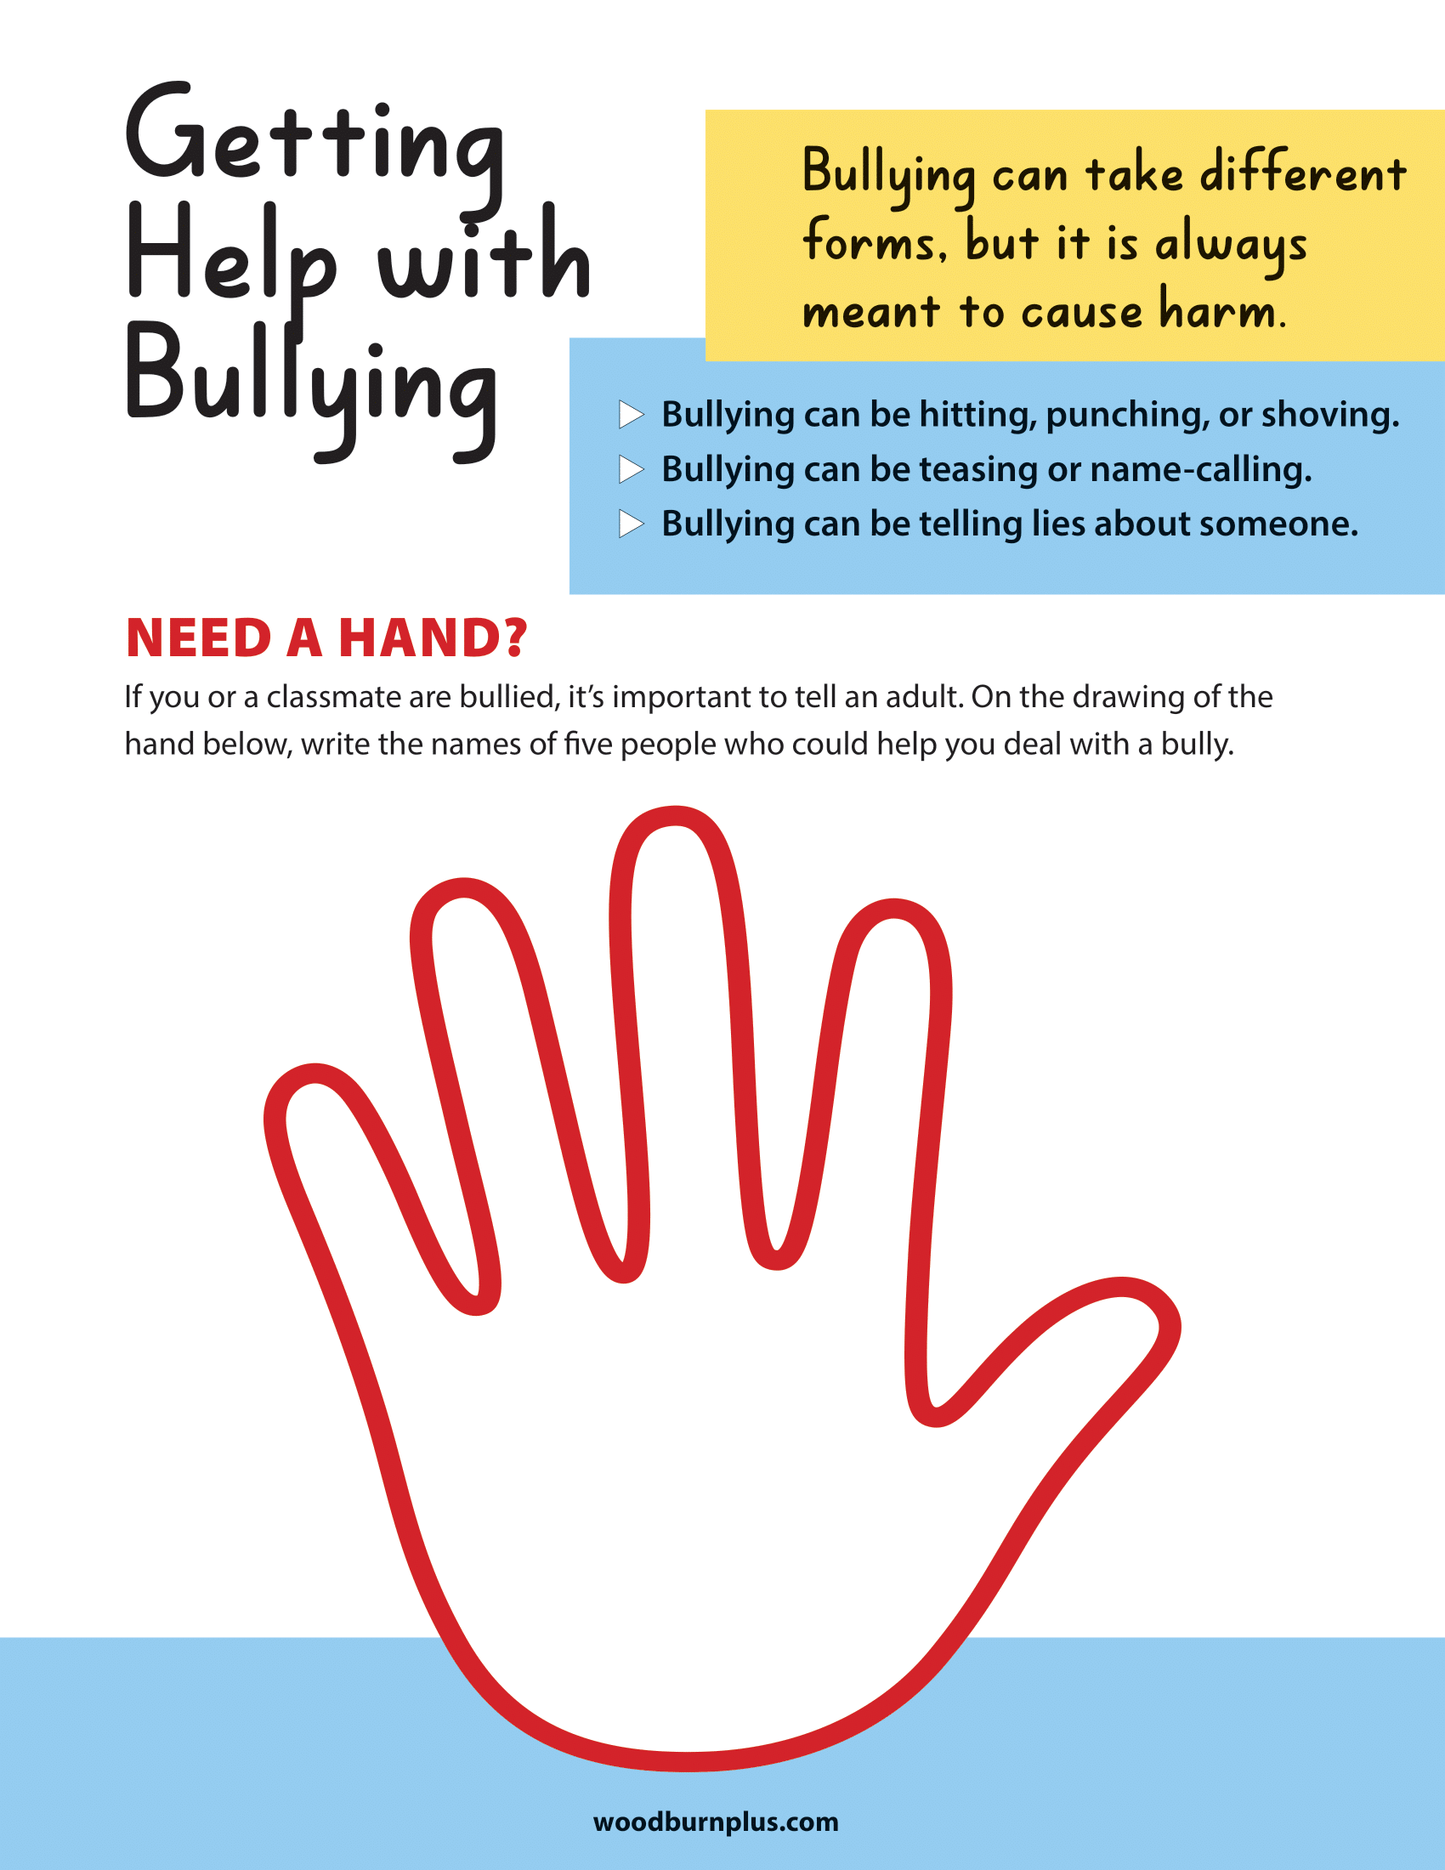 Getting Help with Bullying